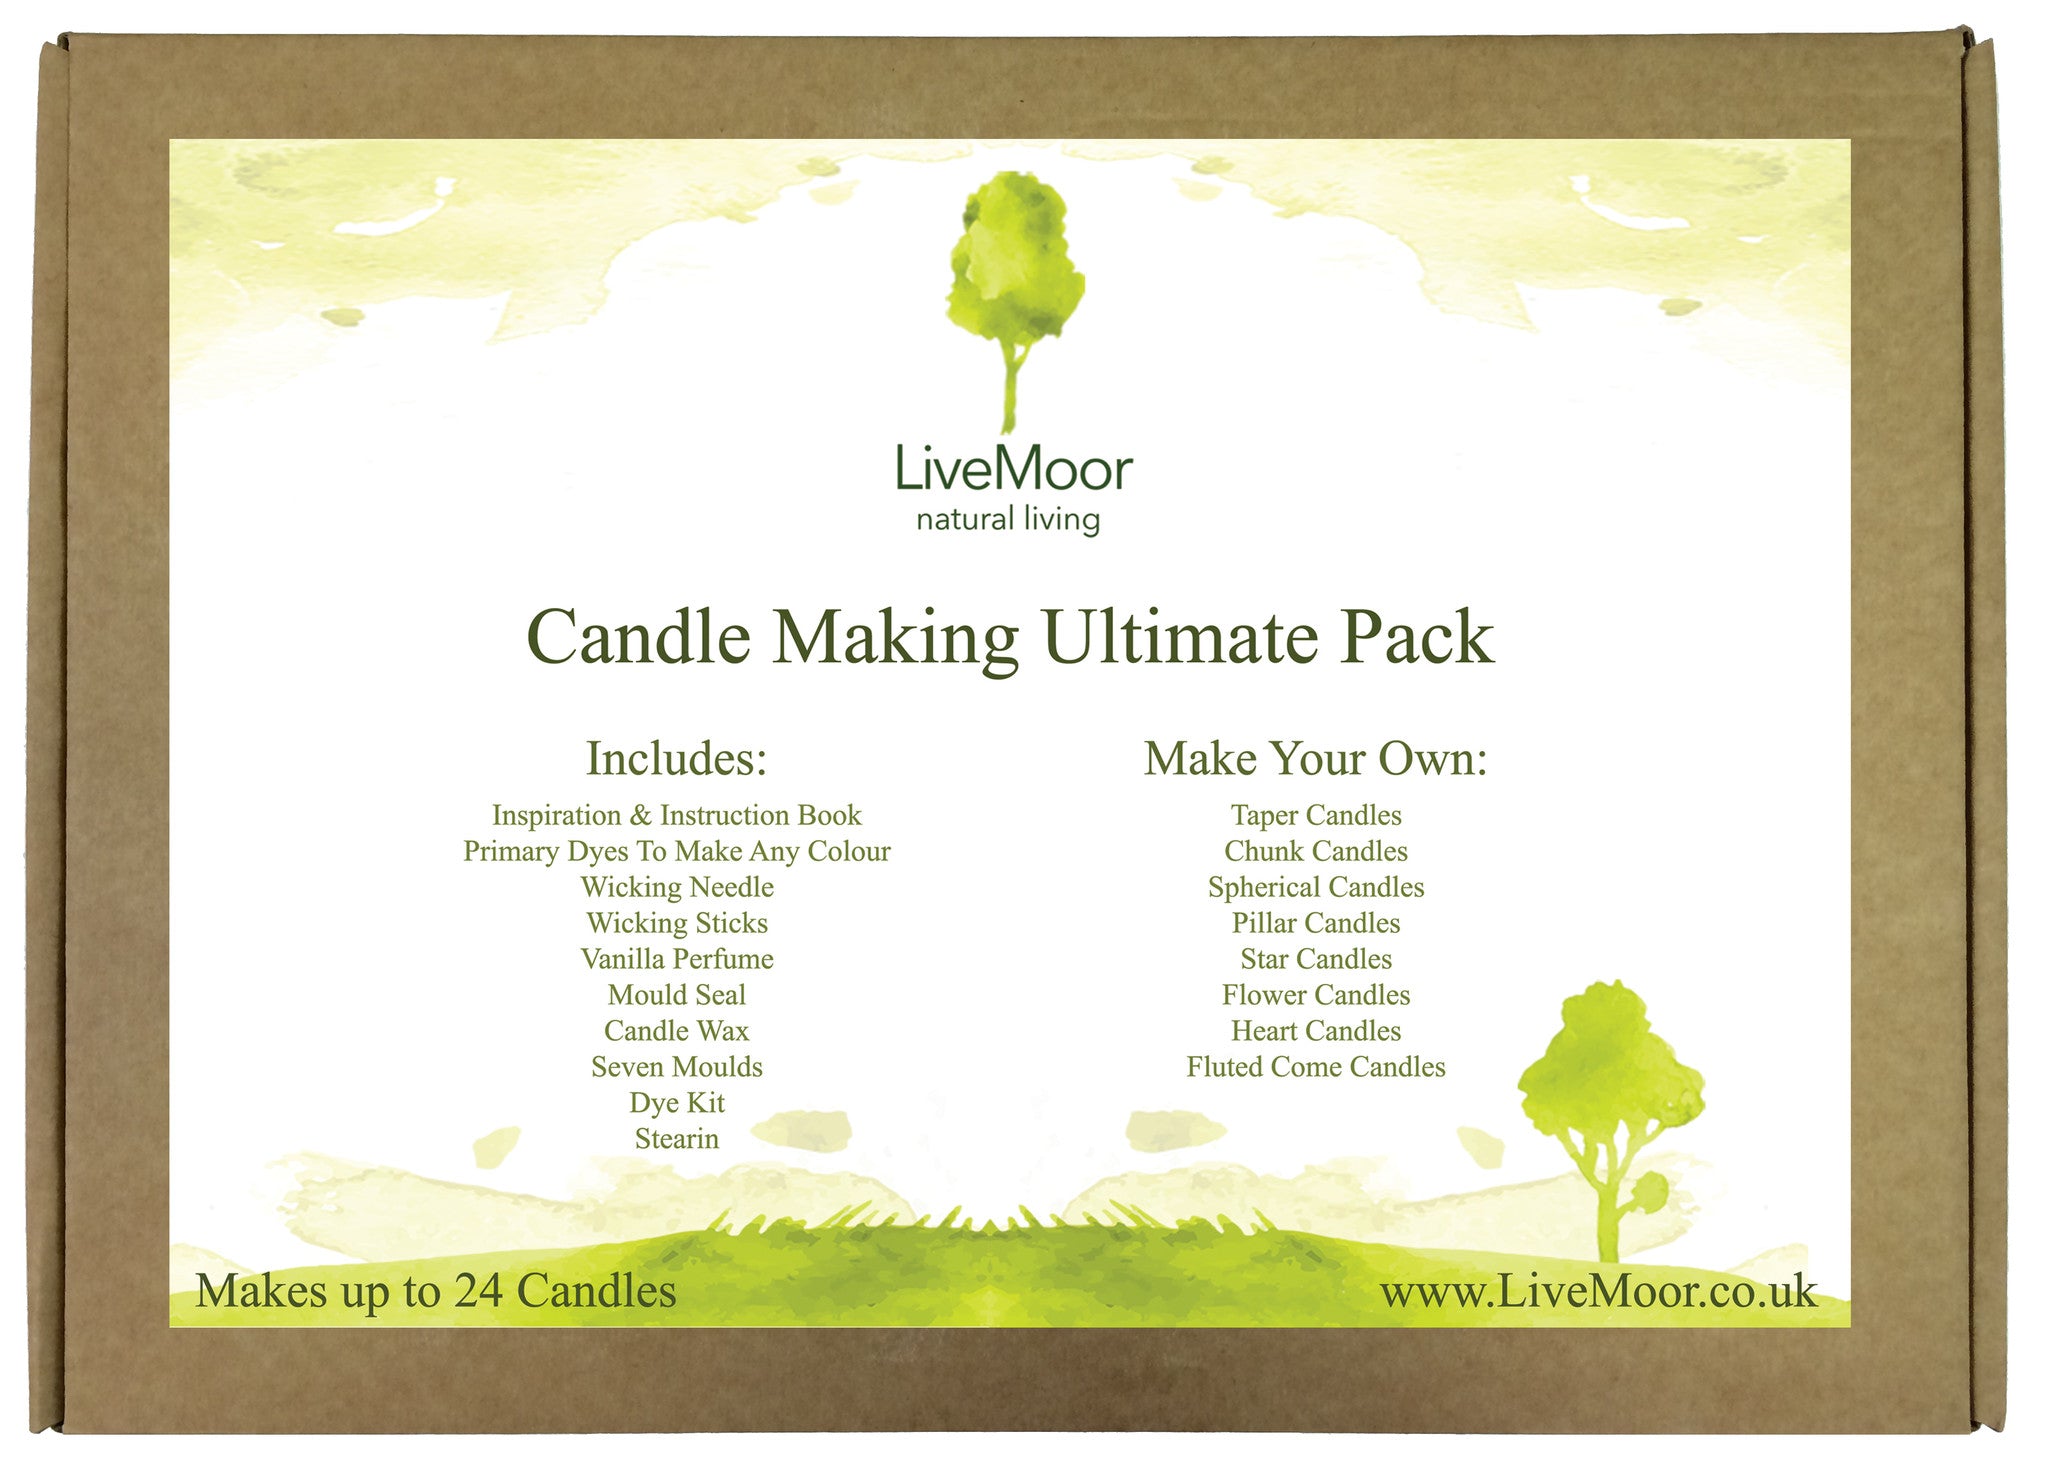 The LiveMoor Ultimate Candle Making Kit